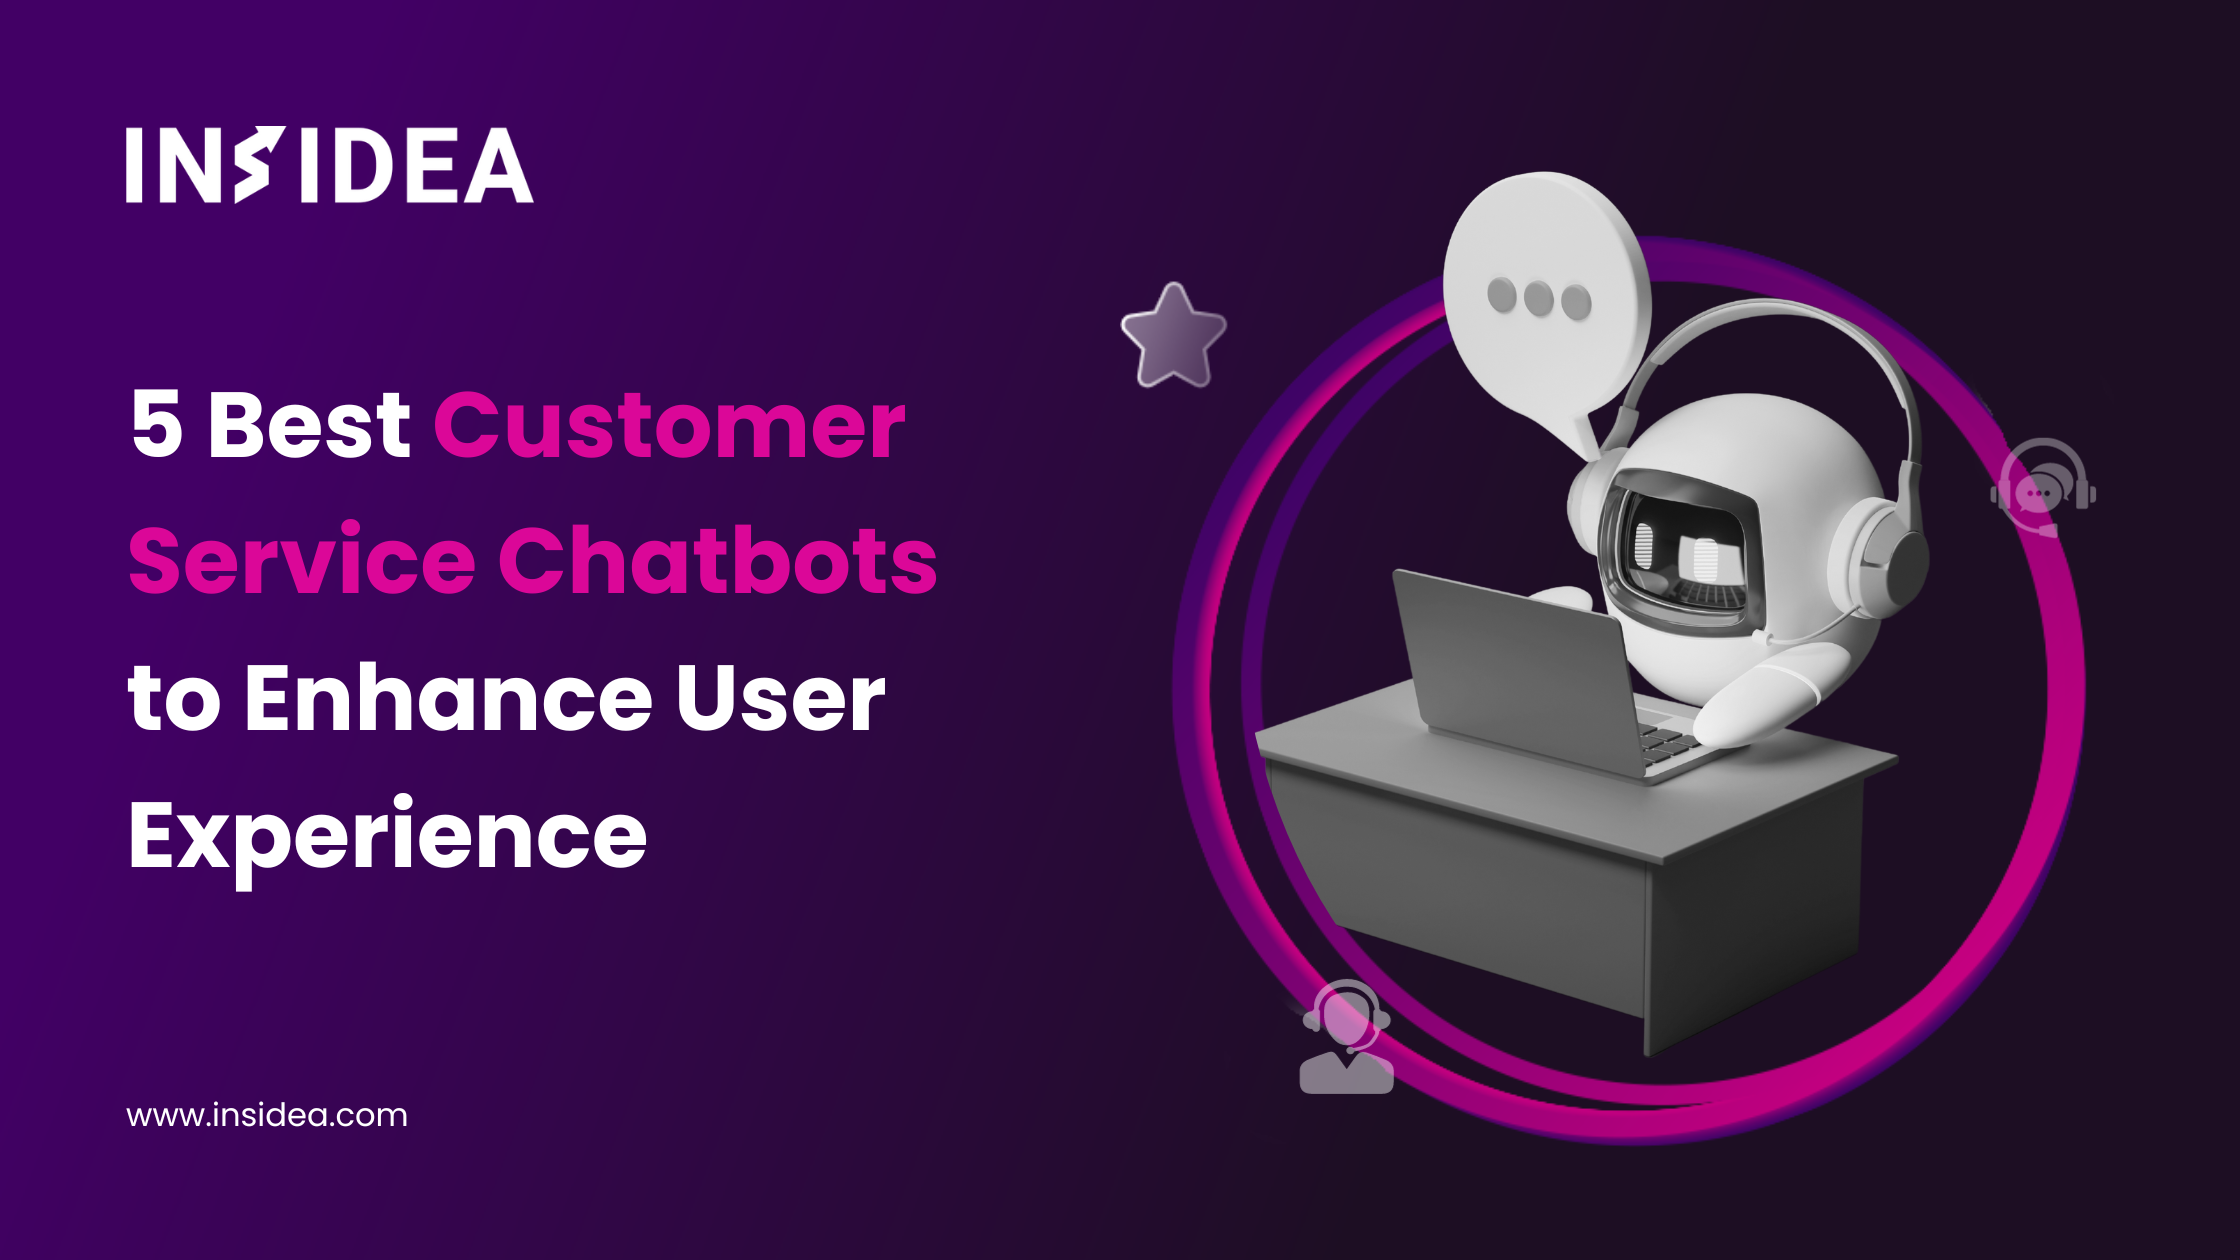 5 Best Customer Service Chatbots to Enhance User Experience